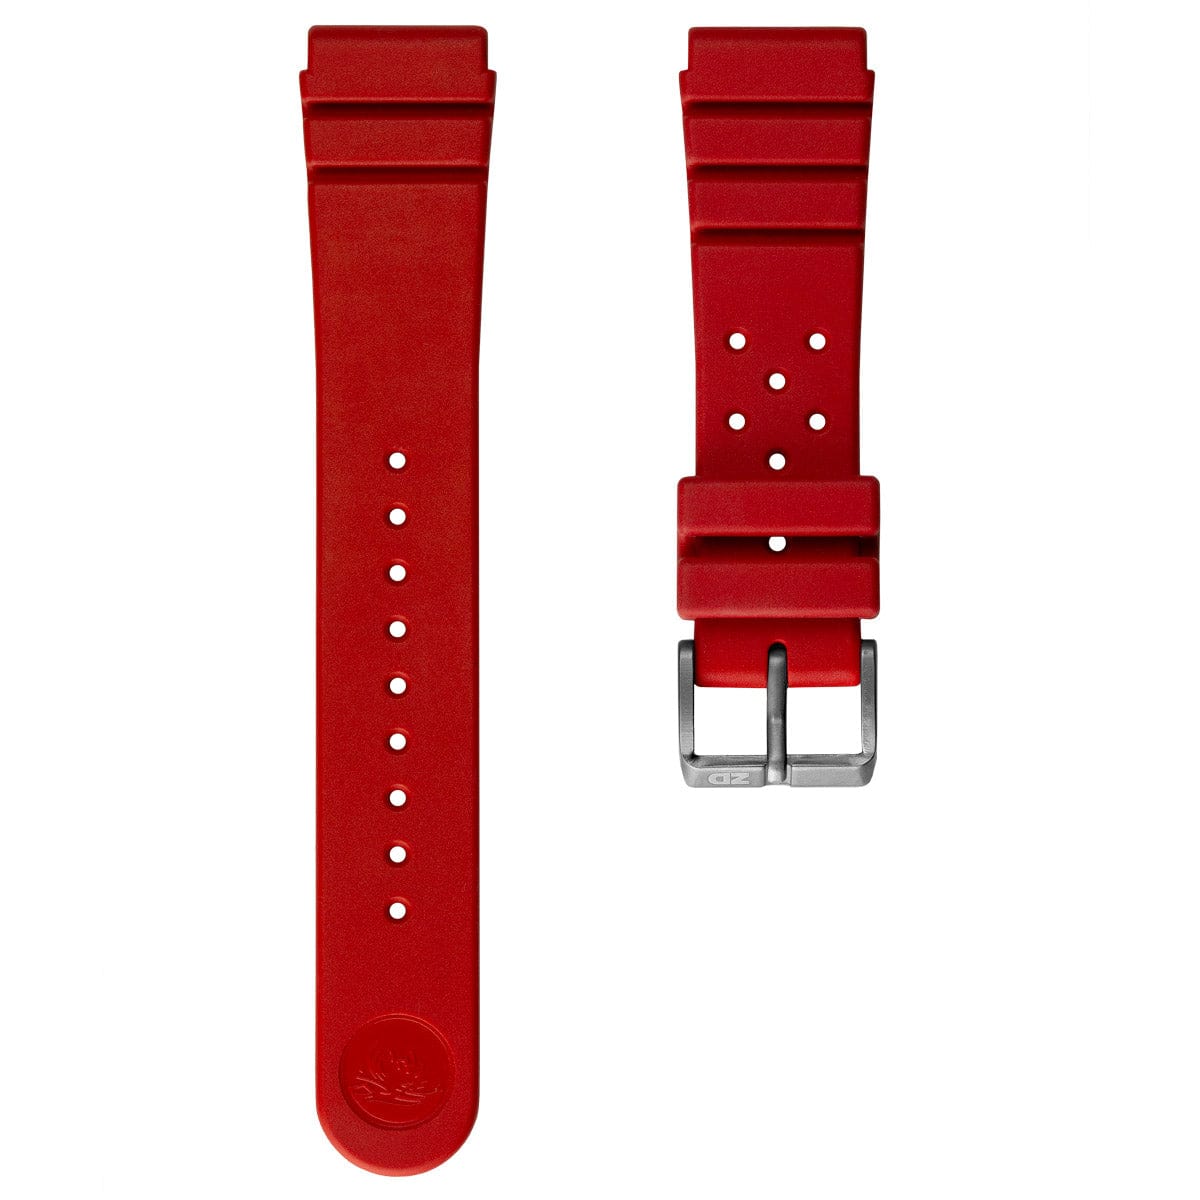 ZULUDIVER 284 Italian Rubber Diver's Watch Strap - Red